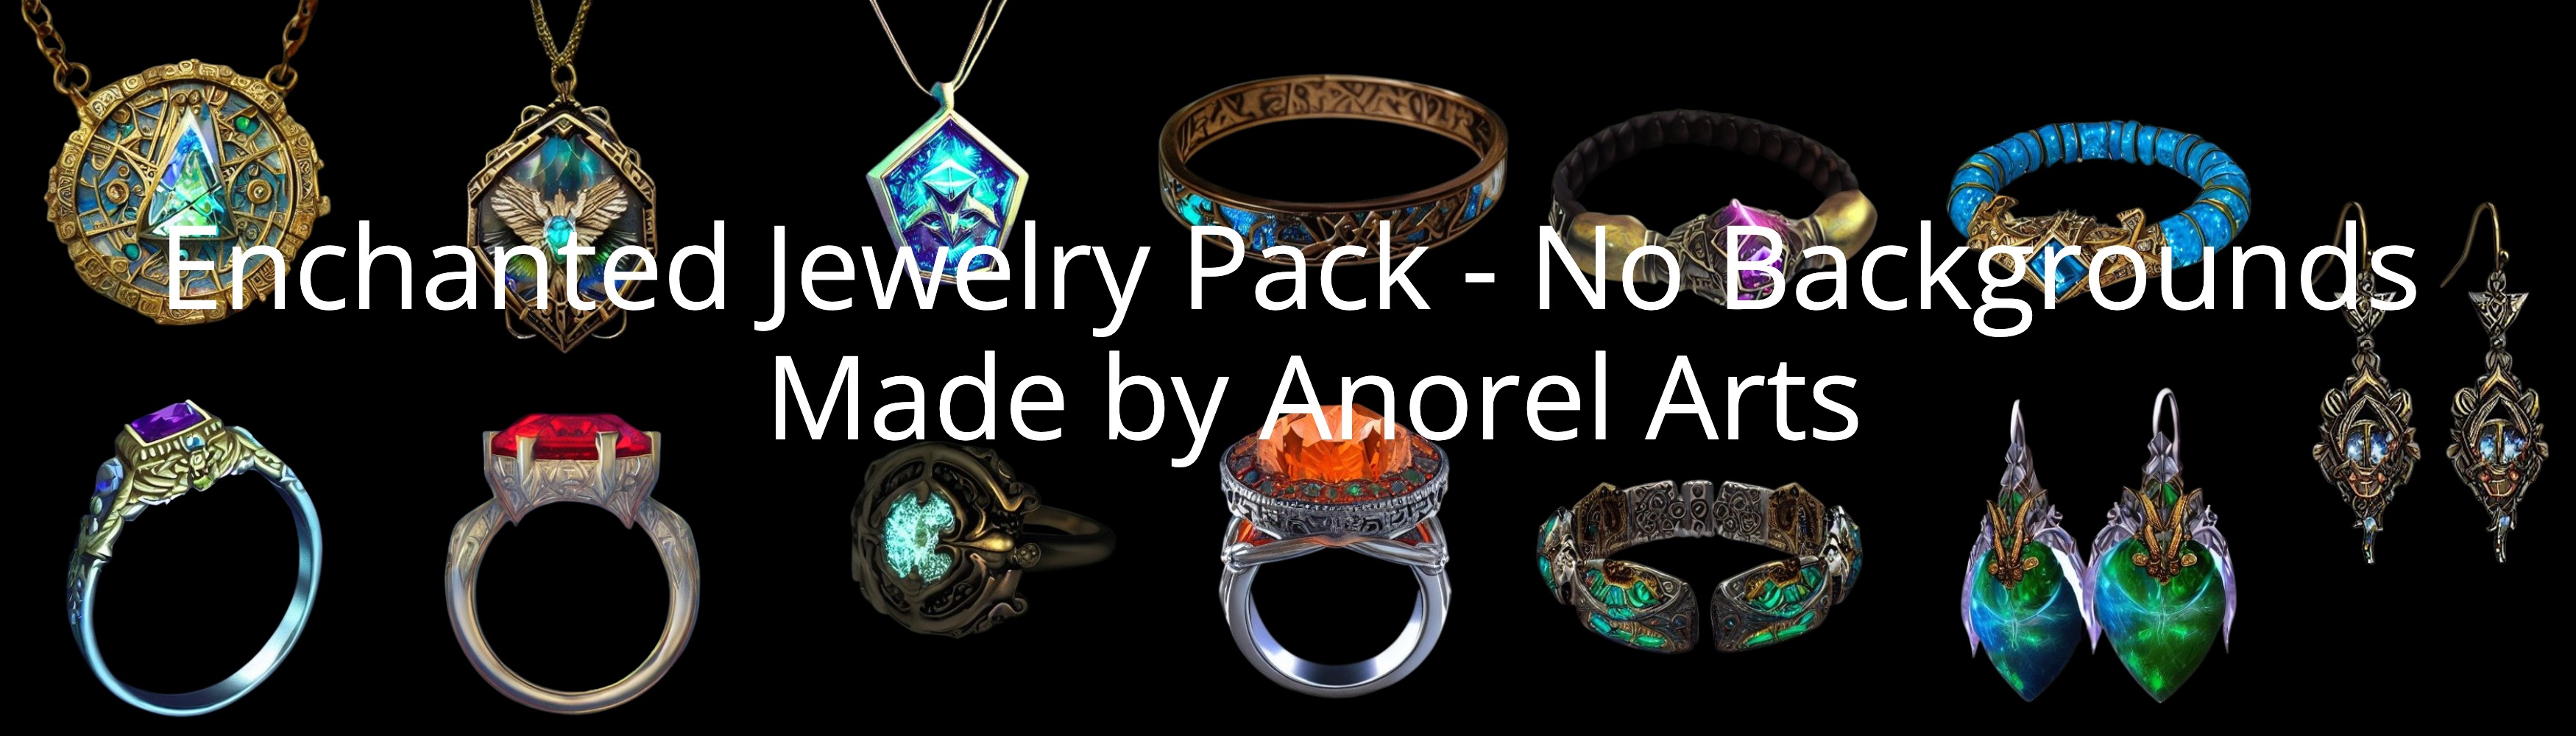 Enchanted Jewelry Pack - No Backgrounds